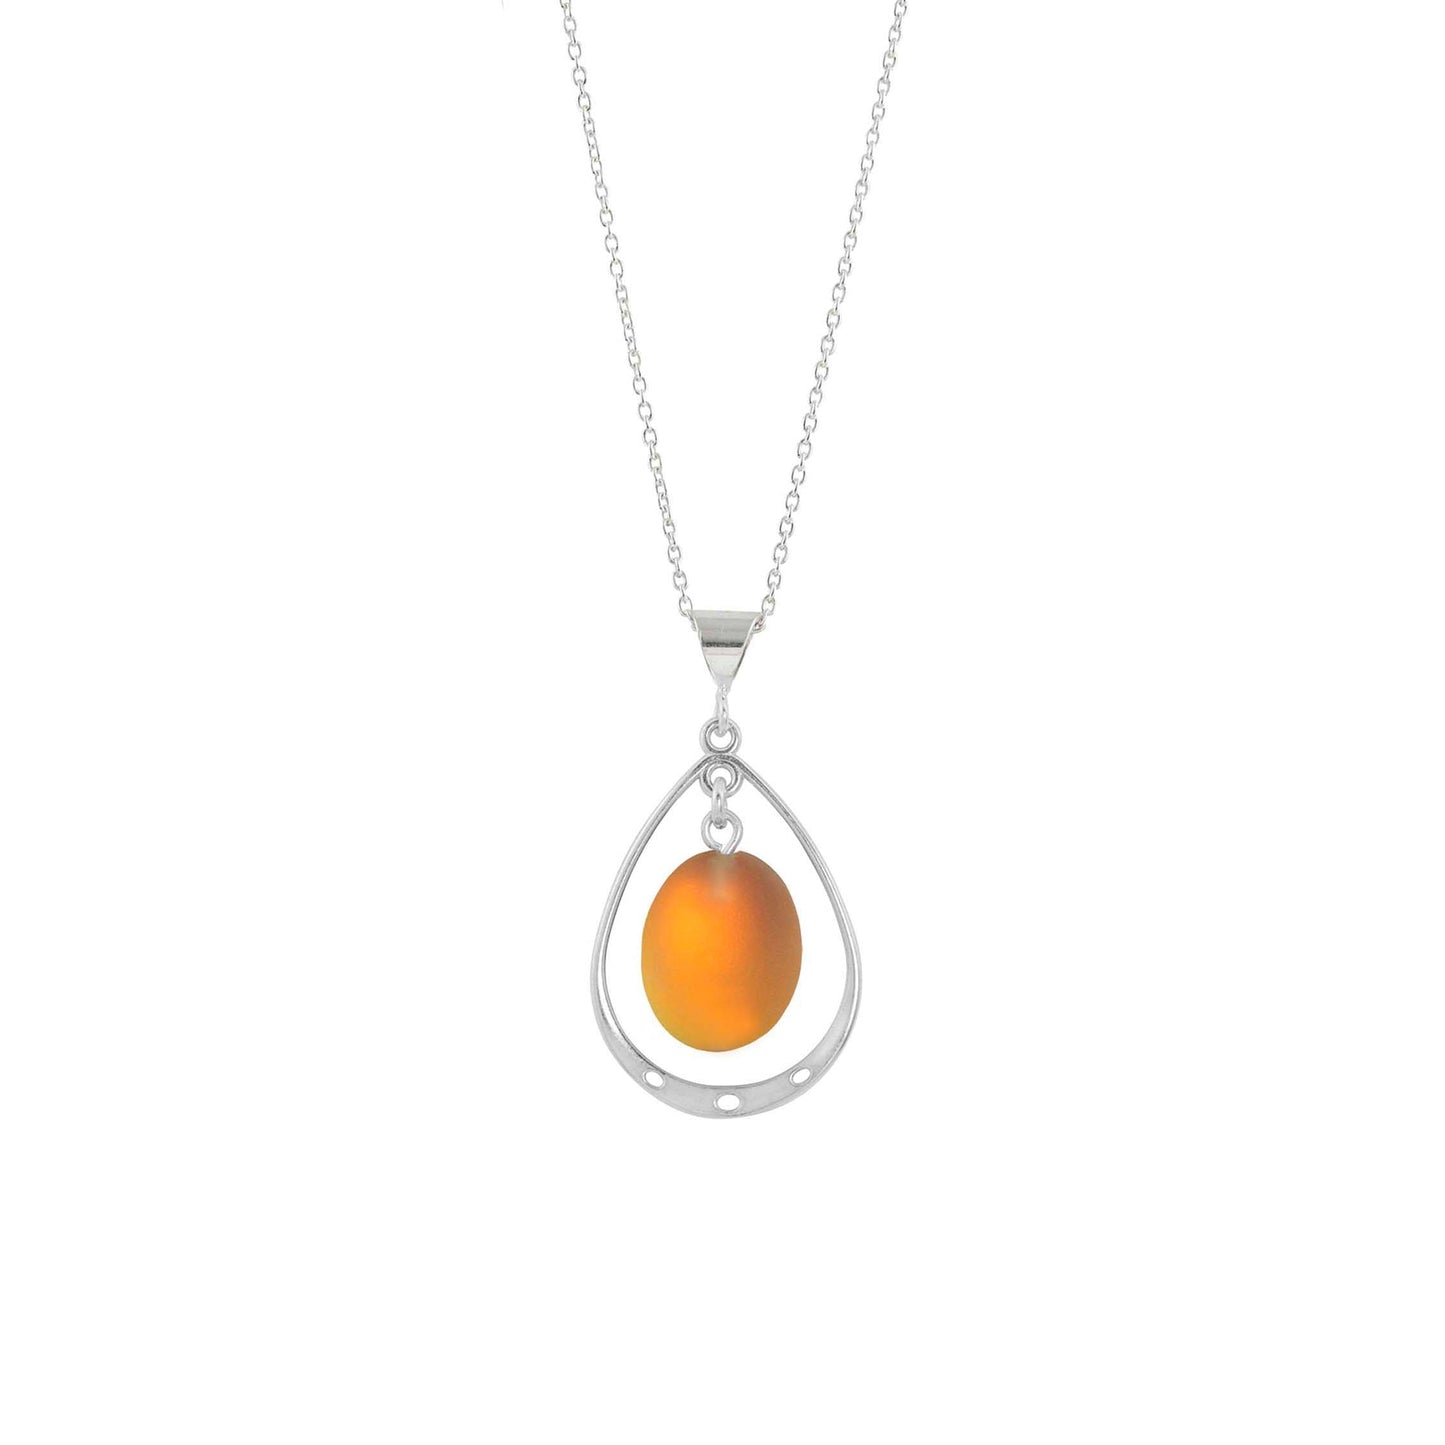 Oval Crystal with Sterling Silver Loop Pendant - Fire